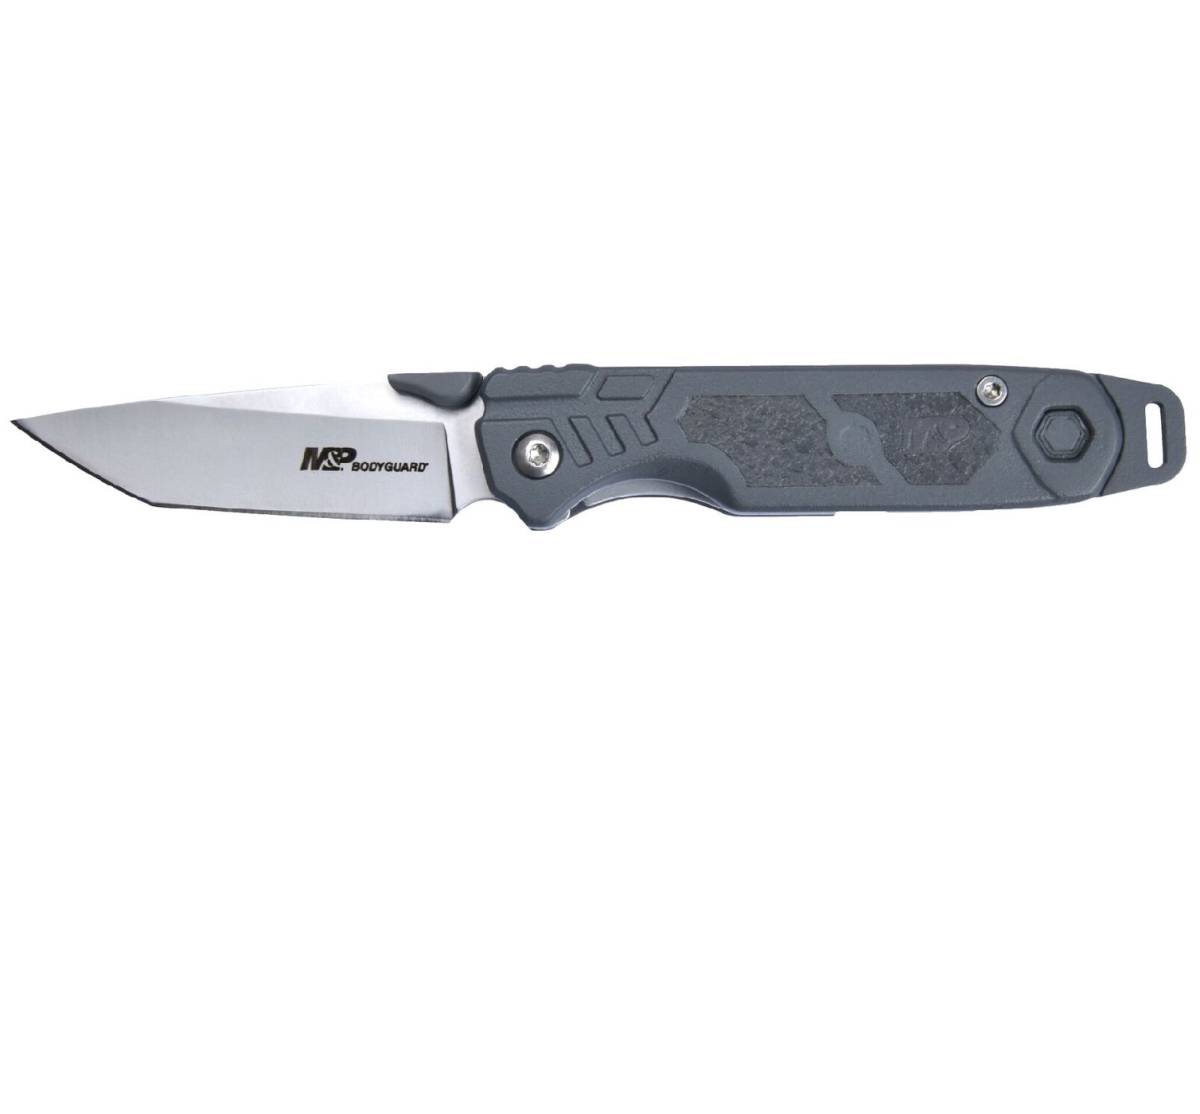 4018013 2.25 In. Bodyguard Folder Knife Blade With Plastic Handle, Gray